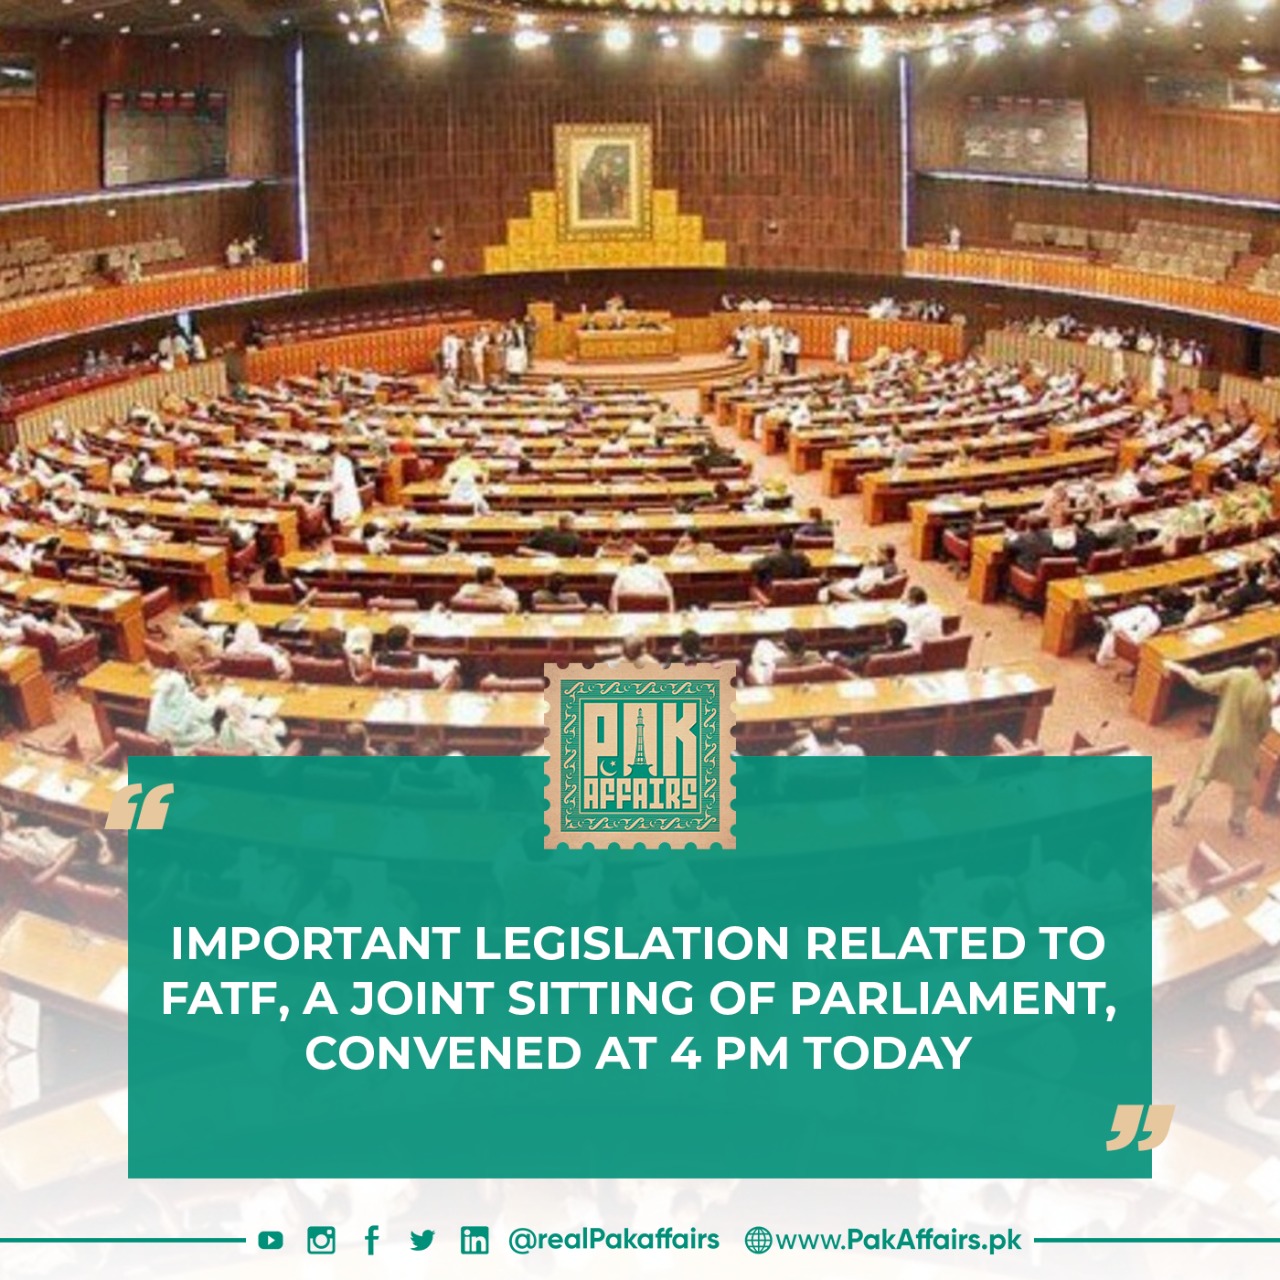 Important legislation related to FATF, a joint sitting of Parliament, convened at 4 pm today.